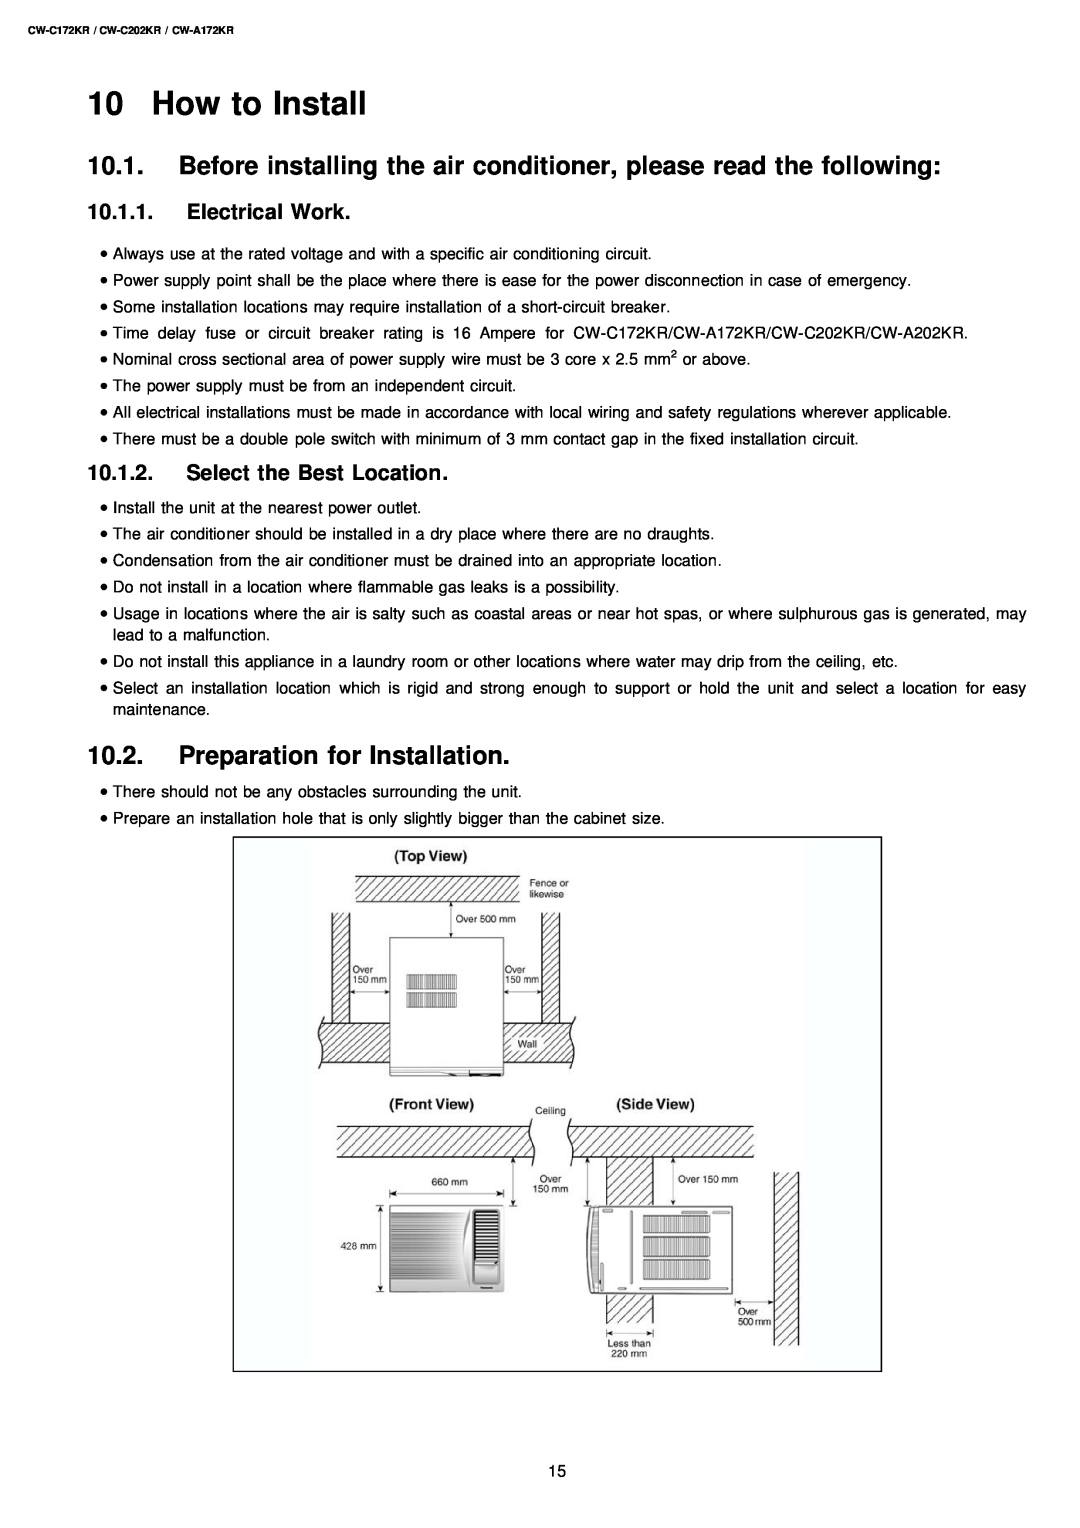 Panasonic CW-C202KR, CW-C172KR How to Install, Preparation for Installation, Electrical Work, Select the Best Location 